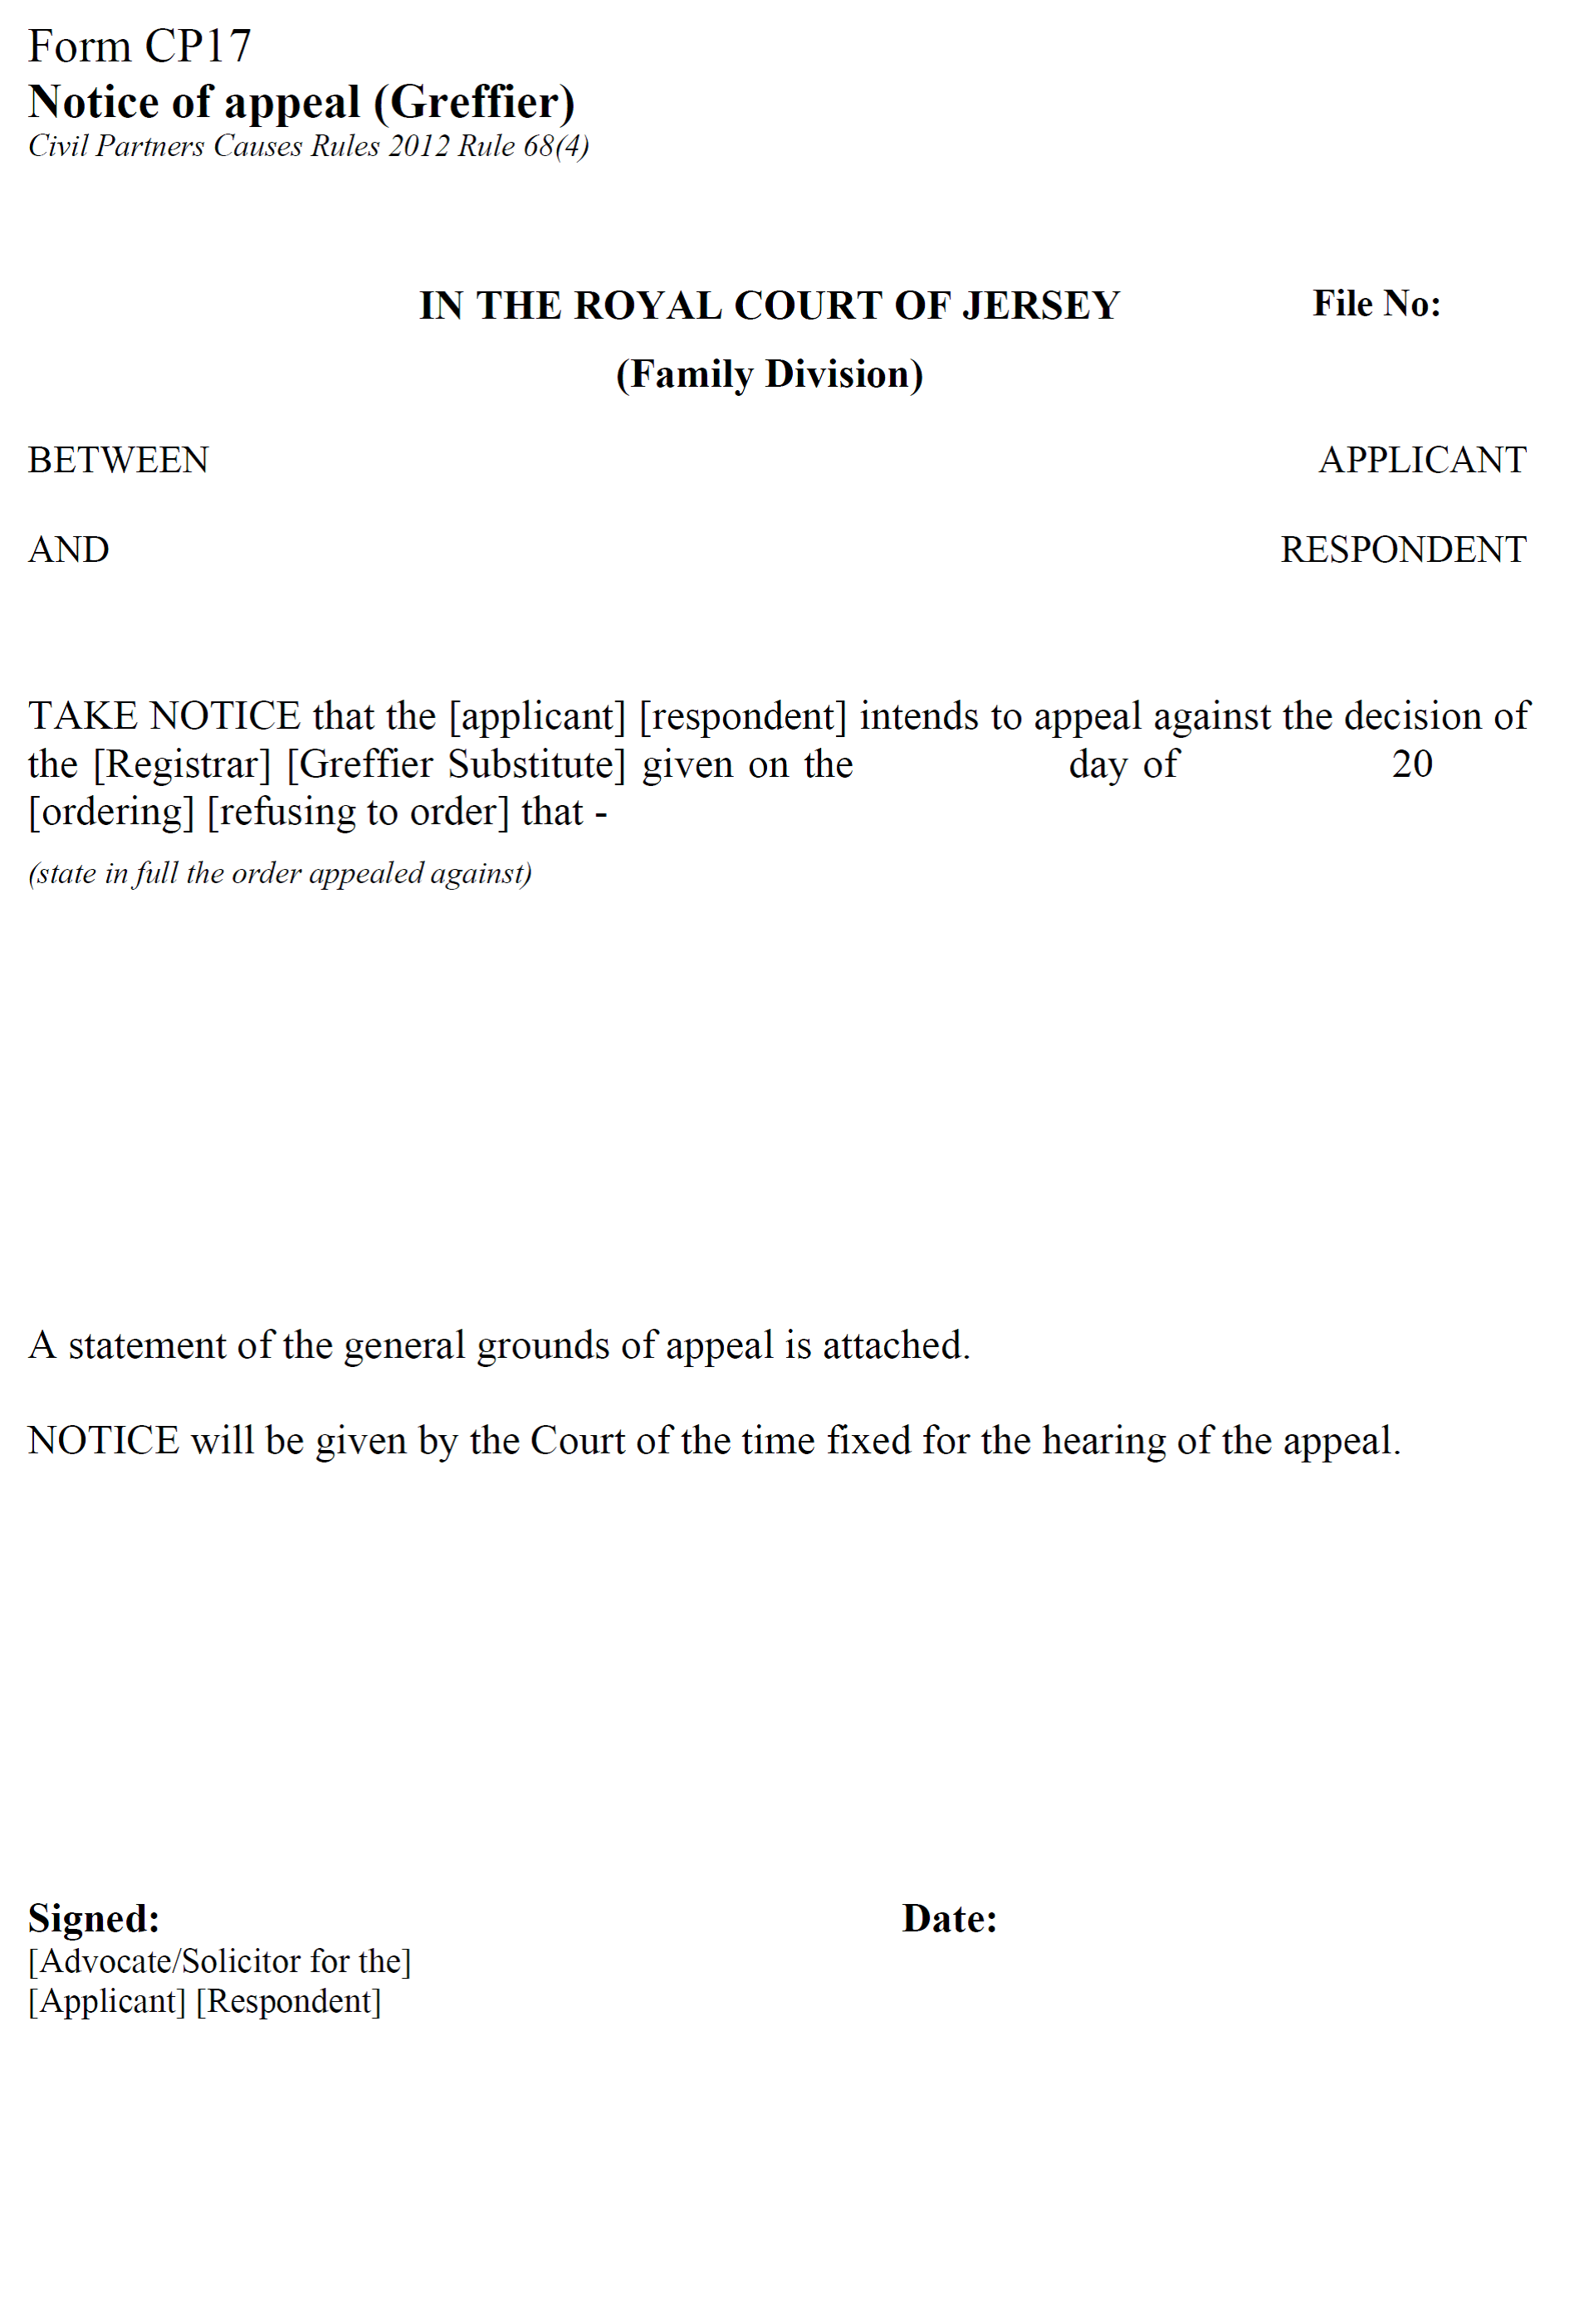 Form CP17 - Notice of appeal against order of the Greffier